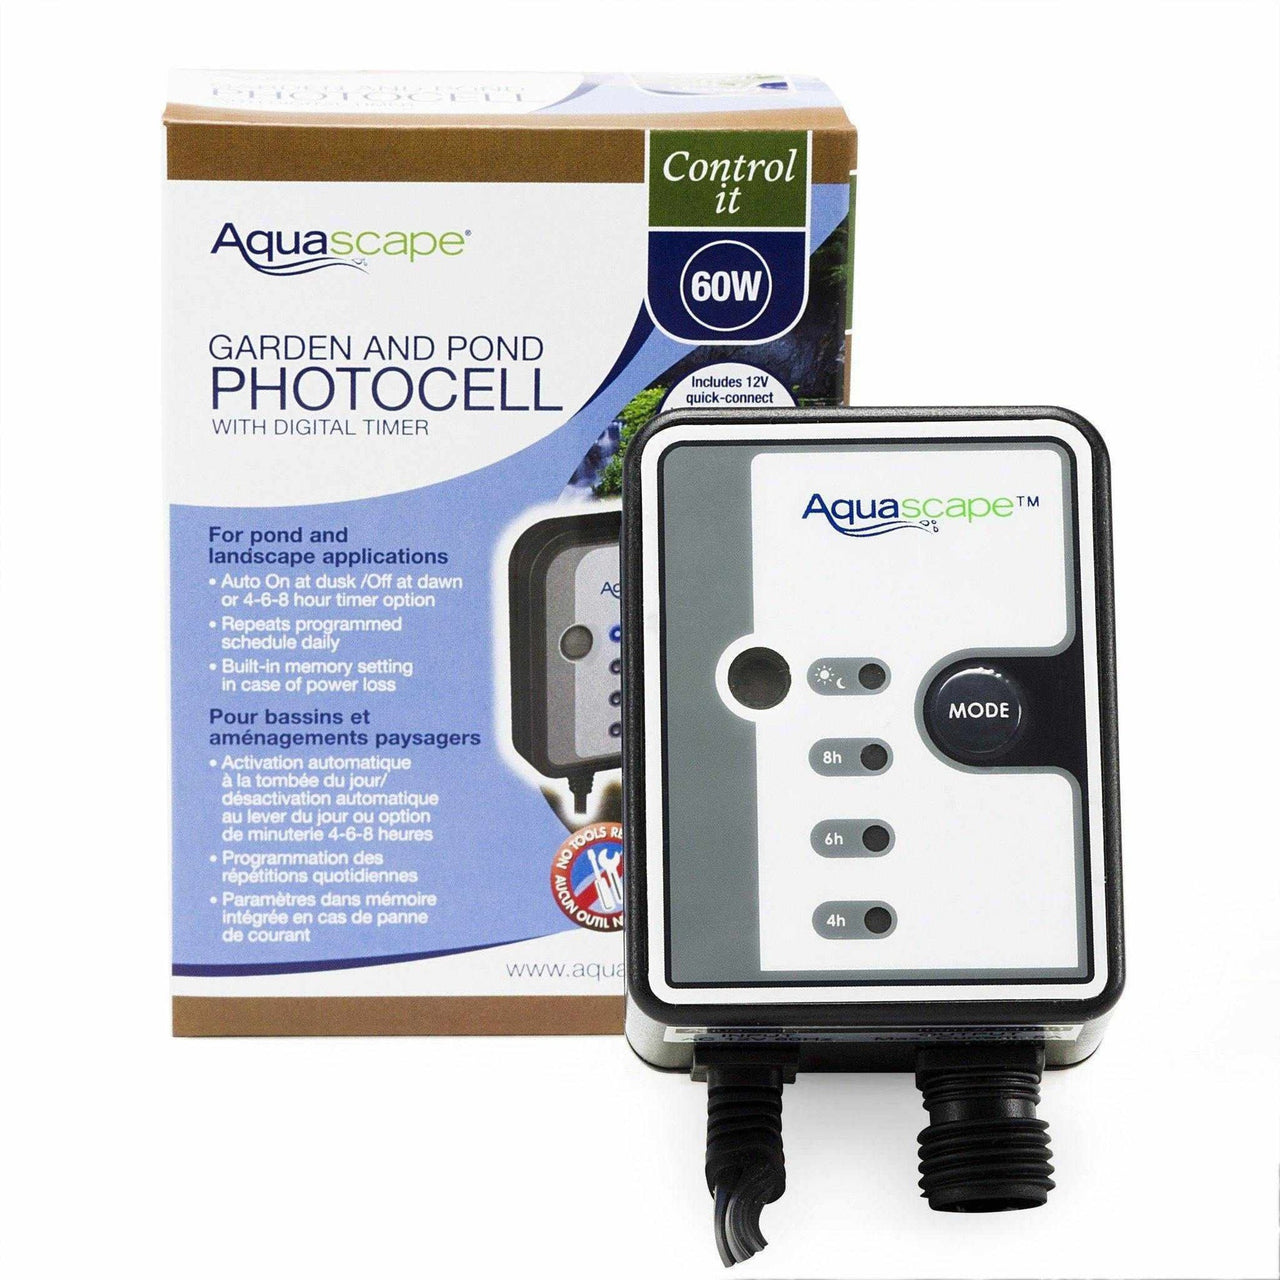 Aquascape 60W Photocell with Digital Timer